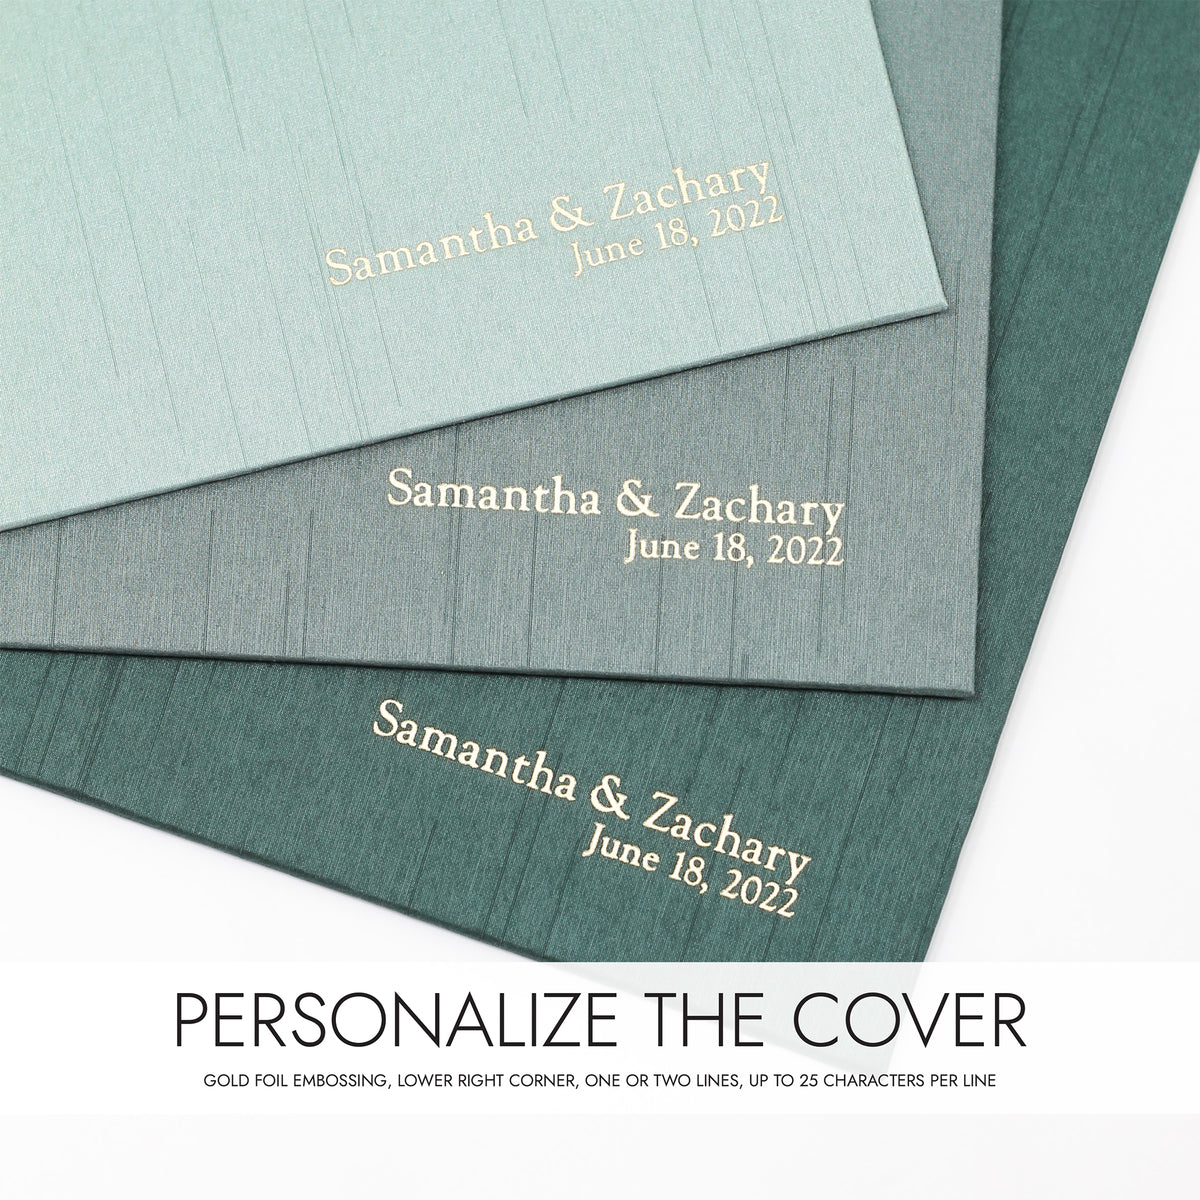 Guestbook with Emerald Silk Cover